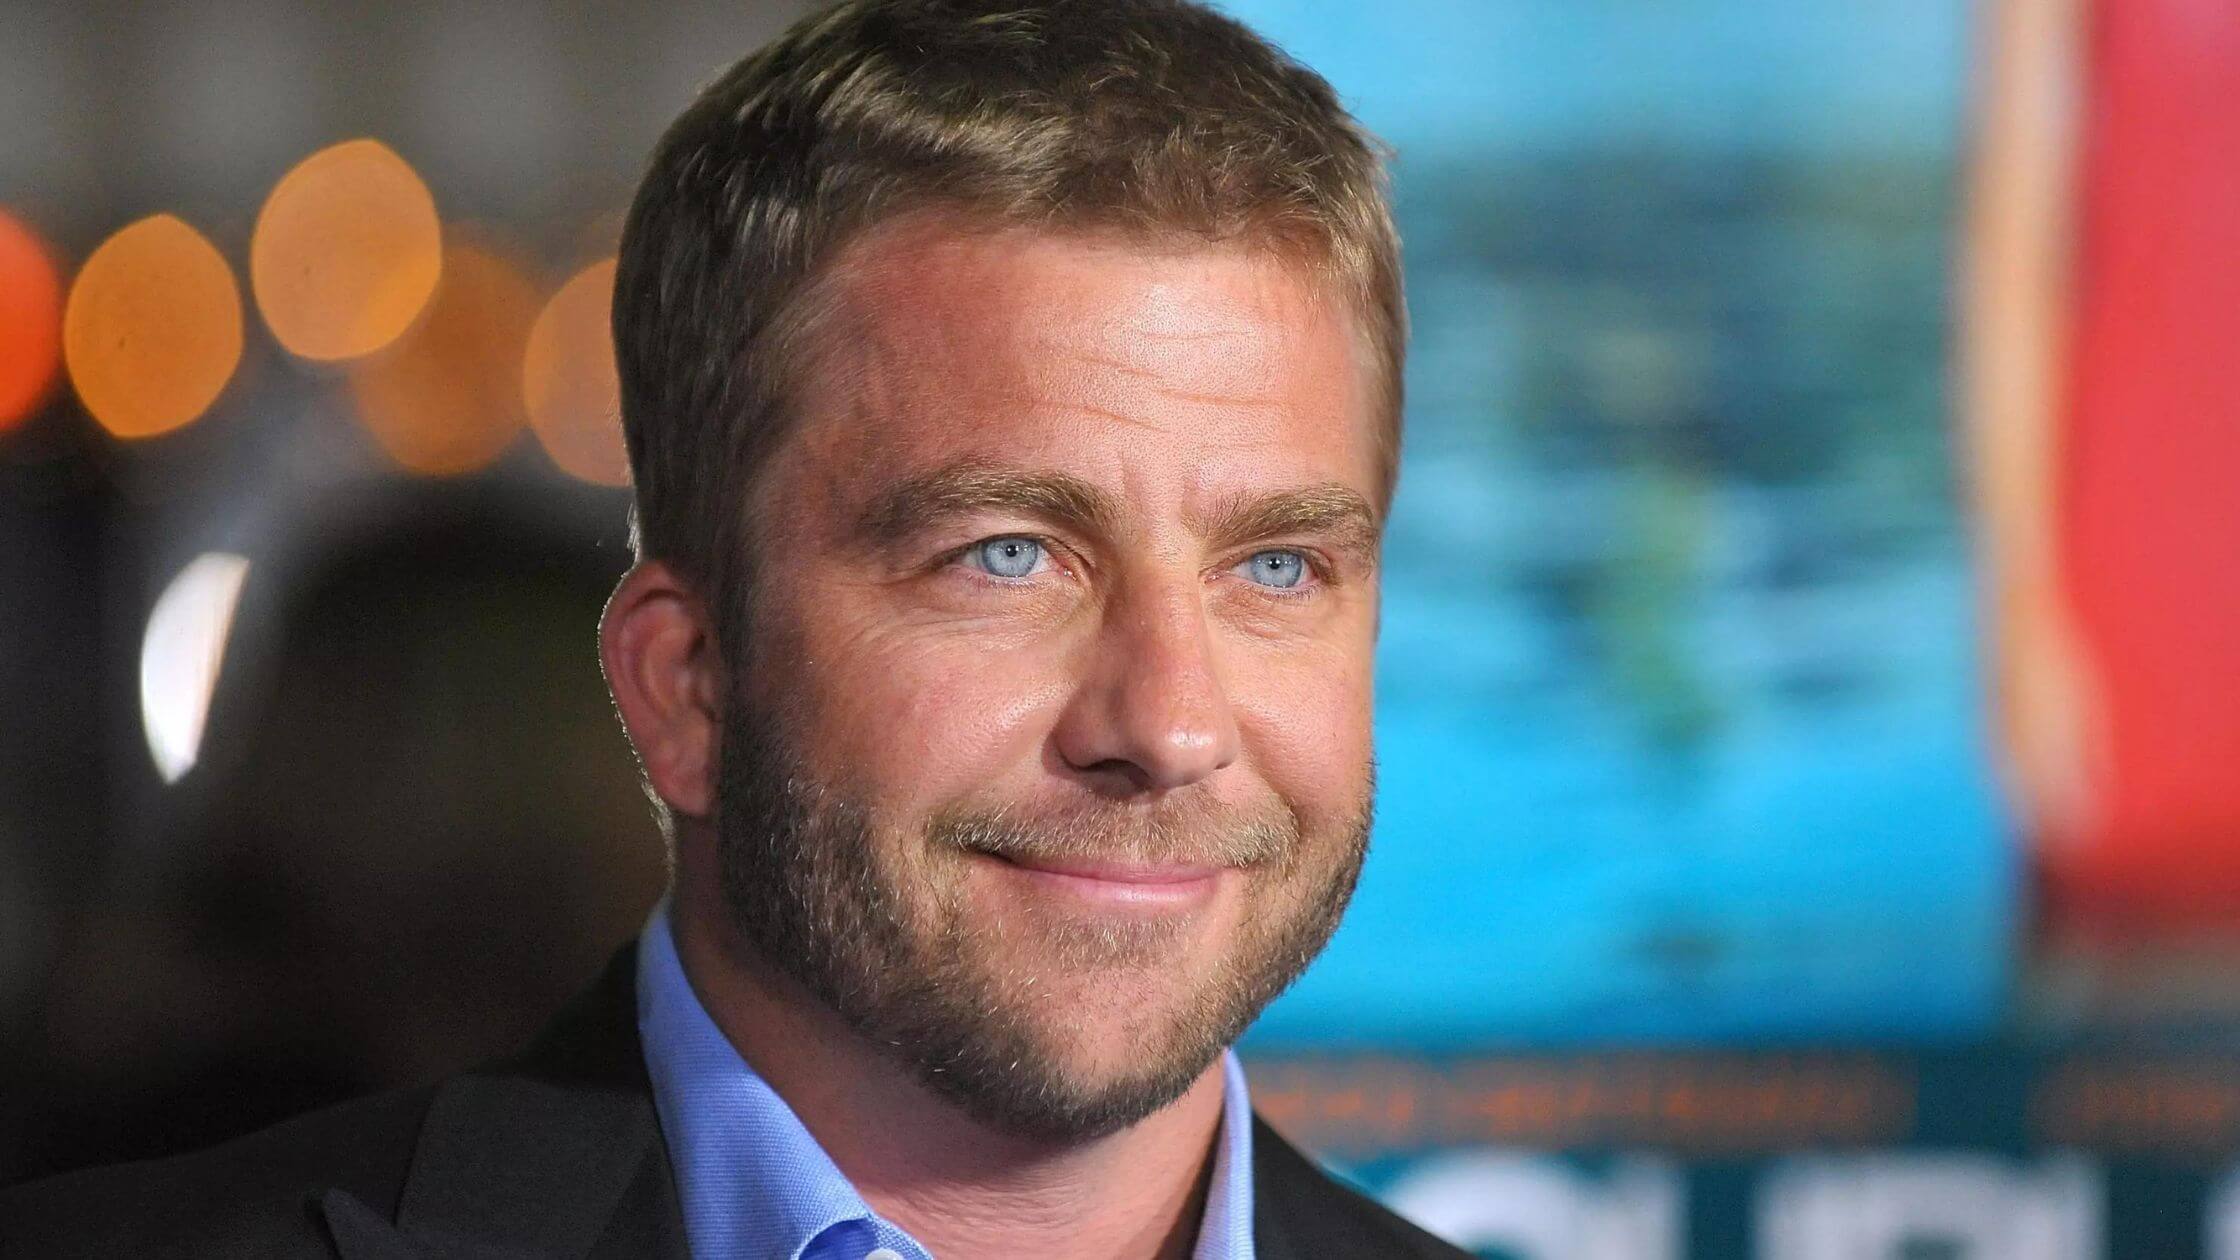 Who Is Peter Billingsley? Age, Net Worth, Career, Parents